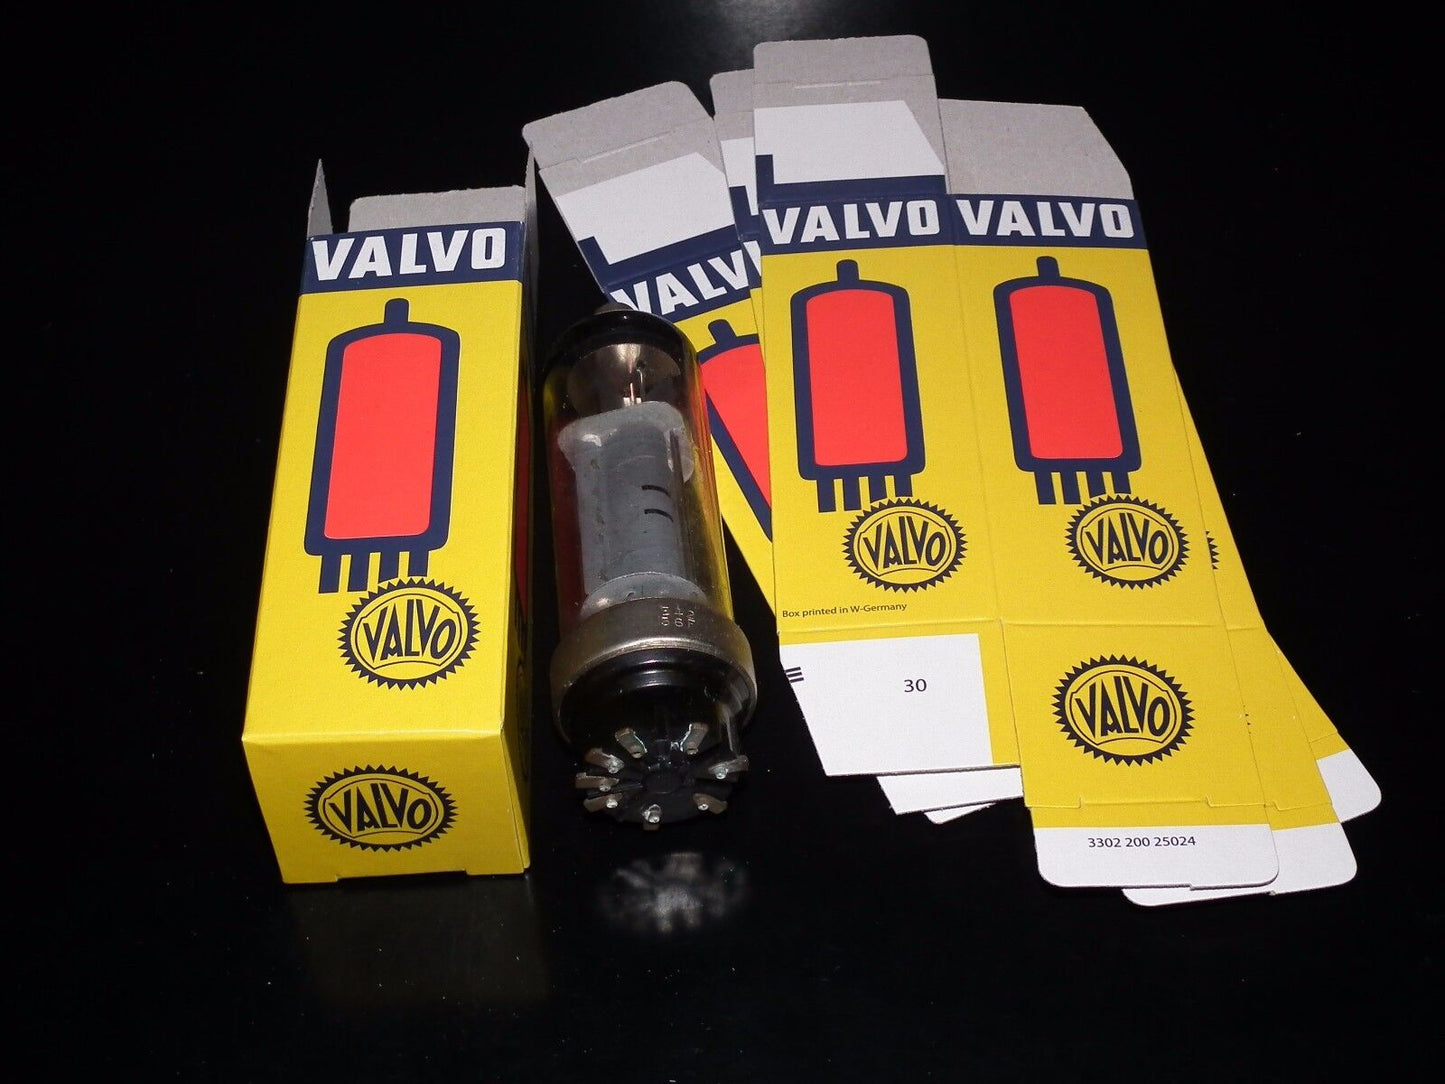 6 pcs Valvo Tube Boxes for Octal and Magnoval tubes EL34 GZ34 6CA7 6SN7 5AR4